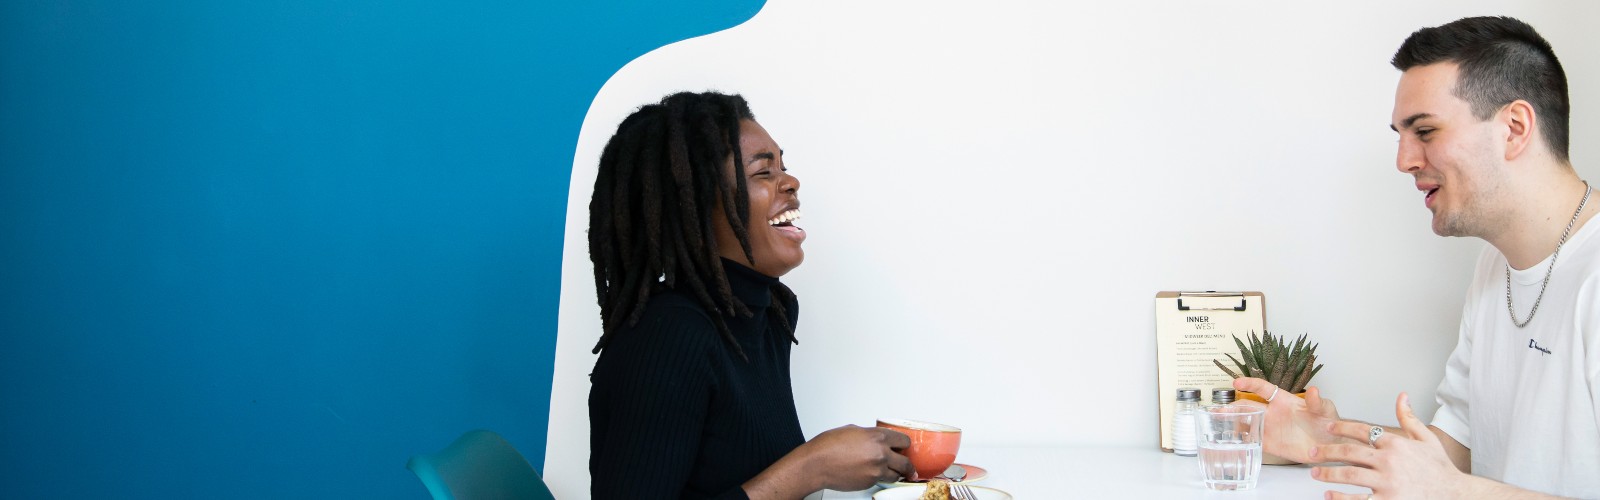 Image of a woman and man against a blue and white background drinking and laughing.